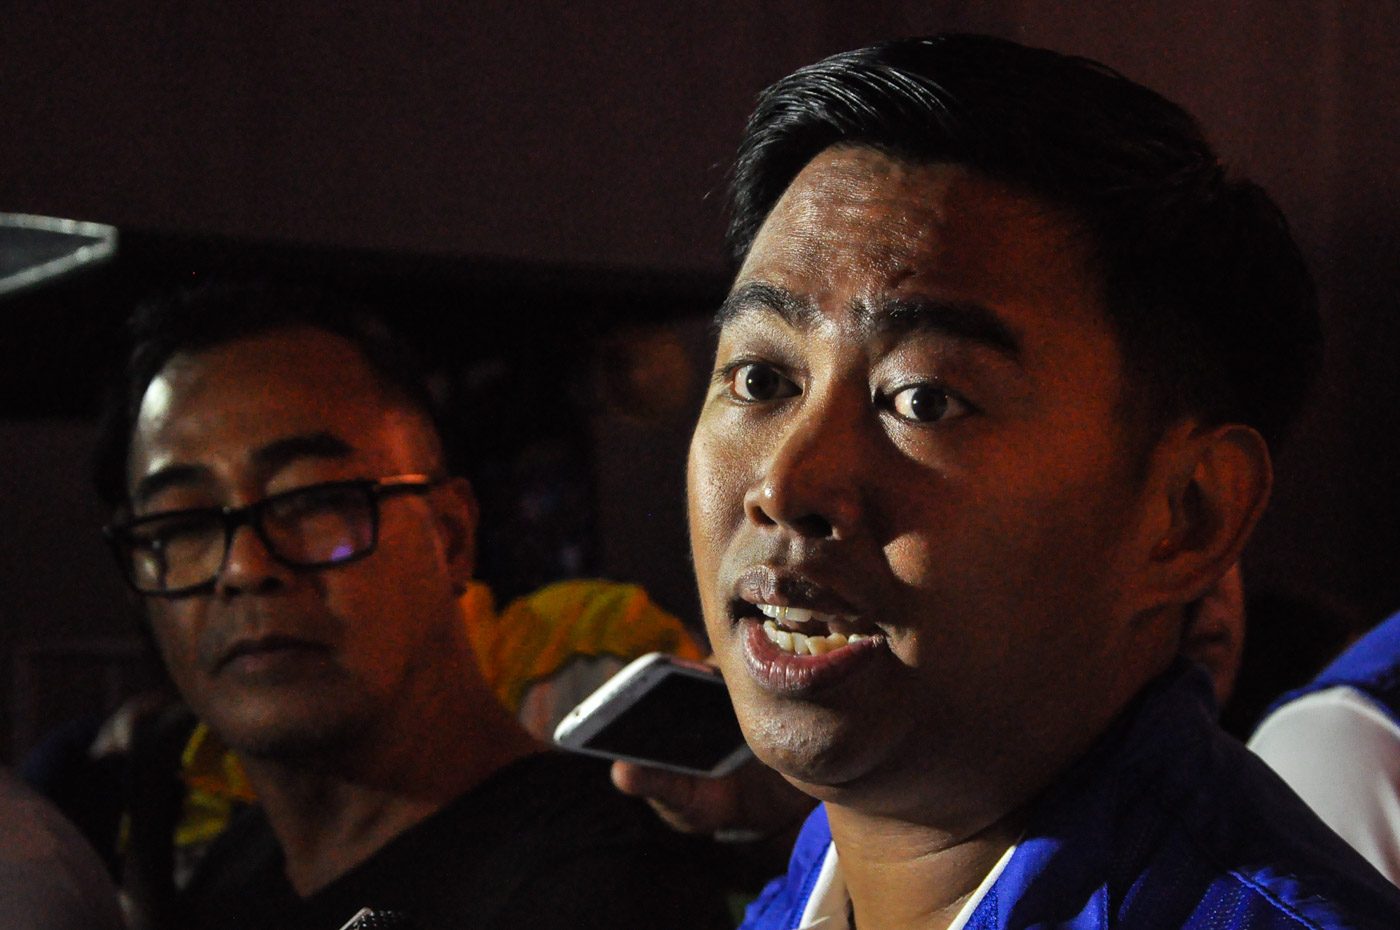 Junjun Binay on rival sister Abby: ‘She’s being driven by vengeance’